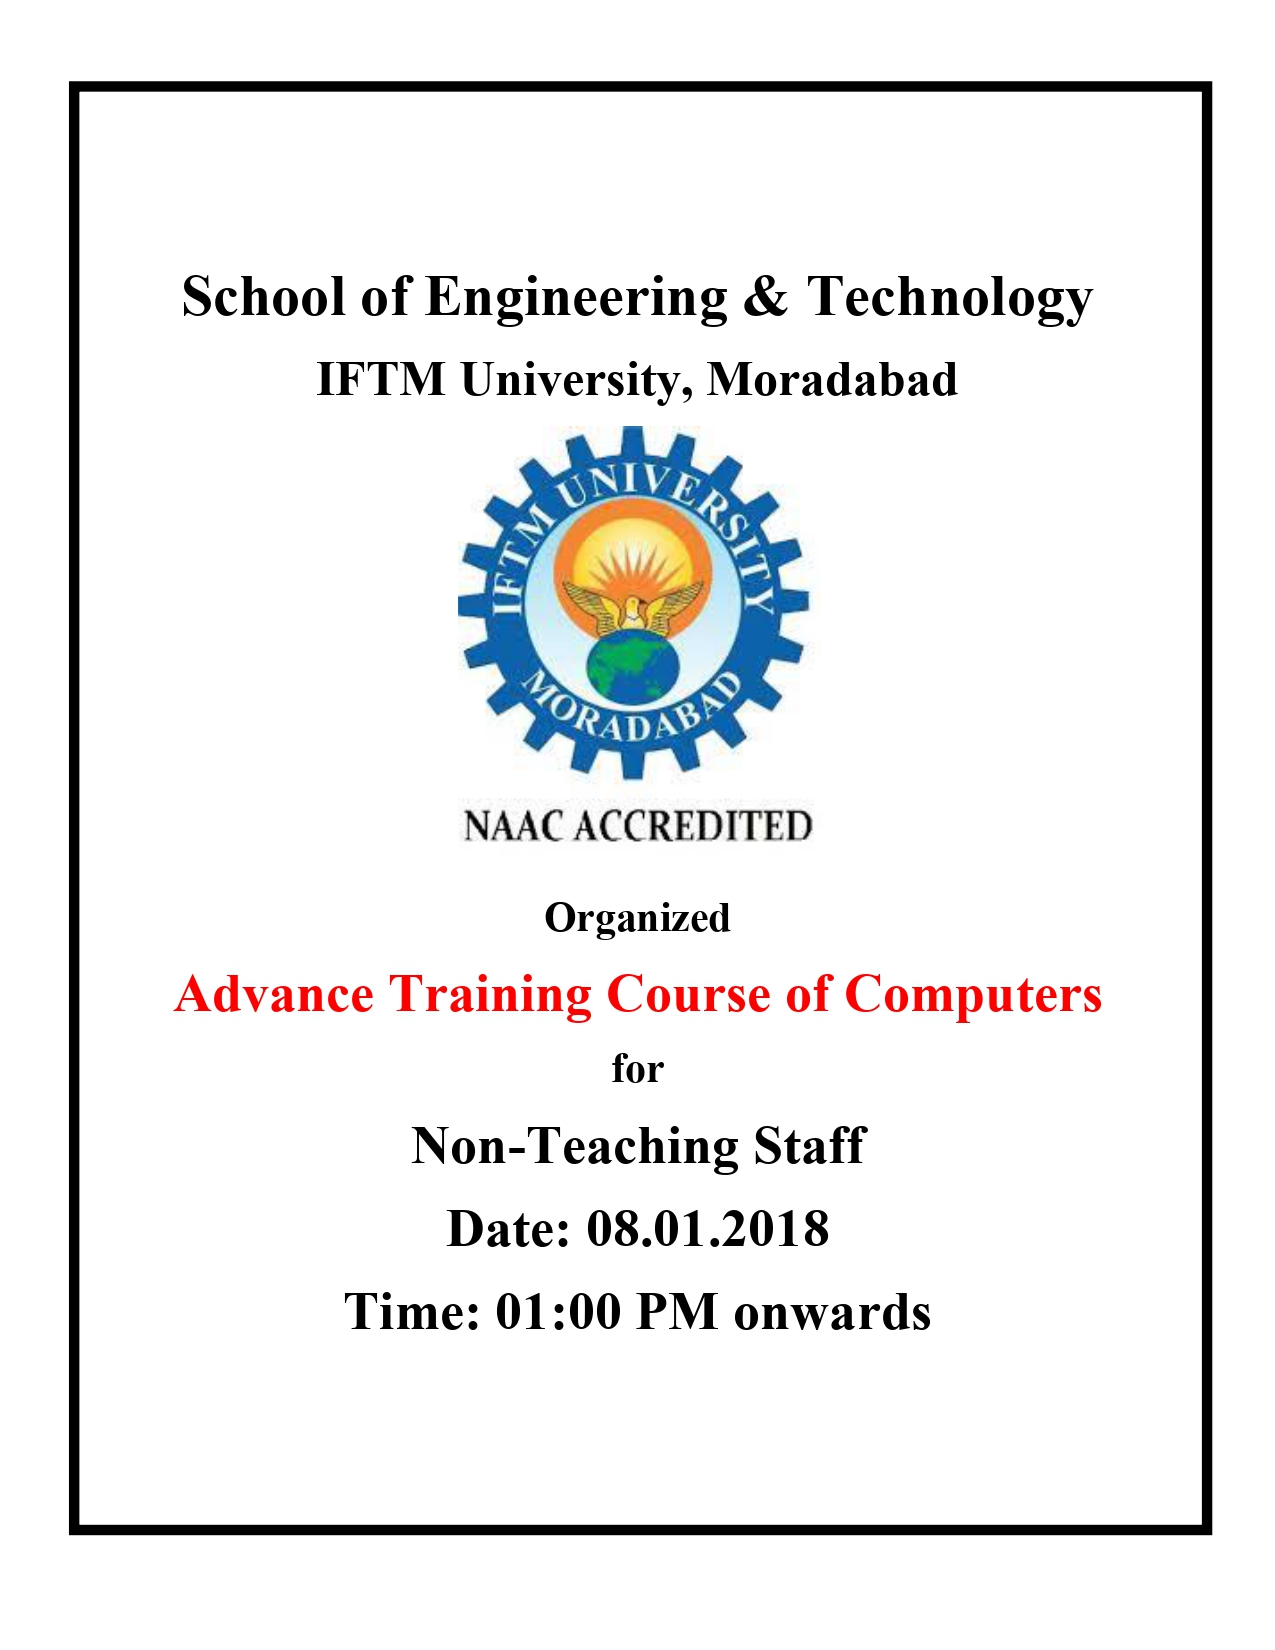 A Training Programme on Advance Training course of Computers for non-teaching staff